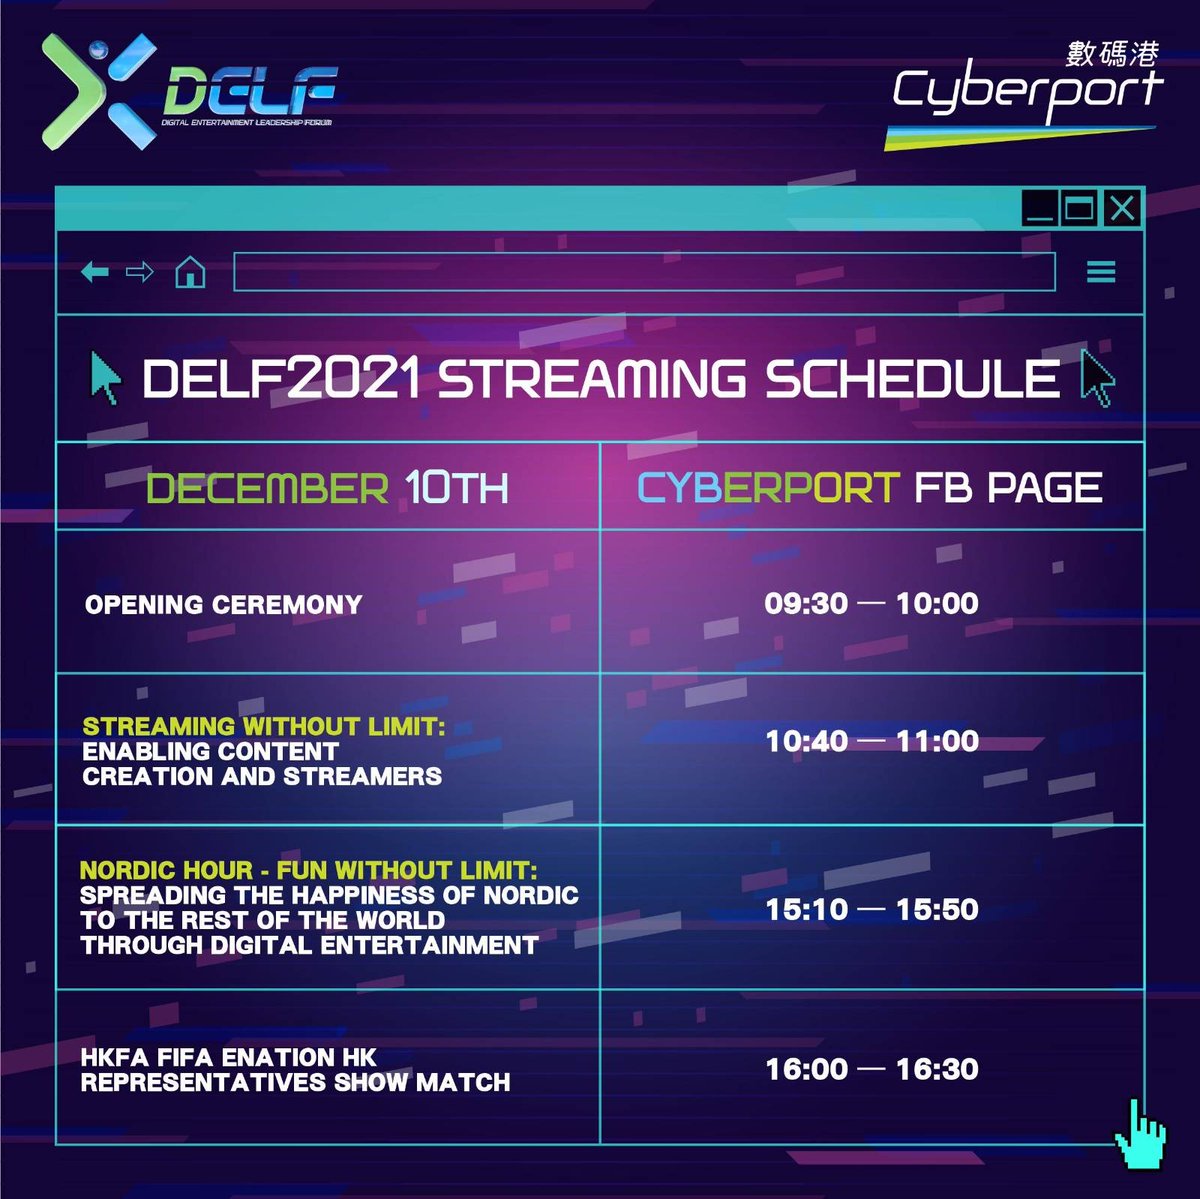 #DELF2021 will kick off tomorrow (10-Dec) ！Stay tuned on Cybperport Facebook Page to watch the live streaming and feel the excitement virtually at any time, from anywhere: bit.ly/31ufbLQ #Cyberport #Hybrid